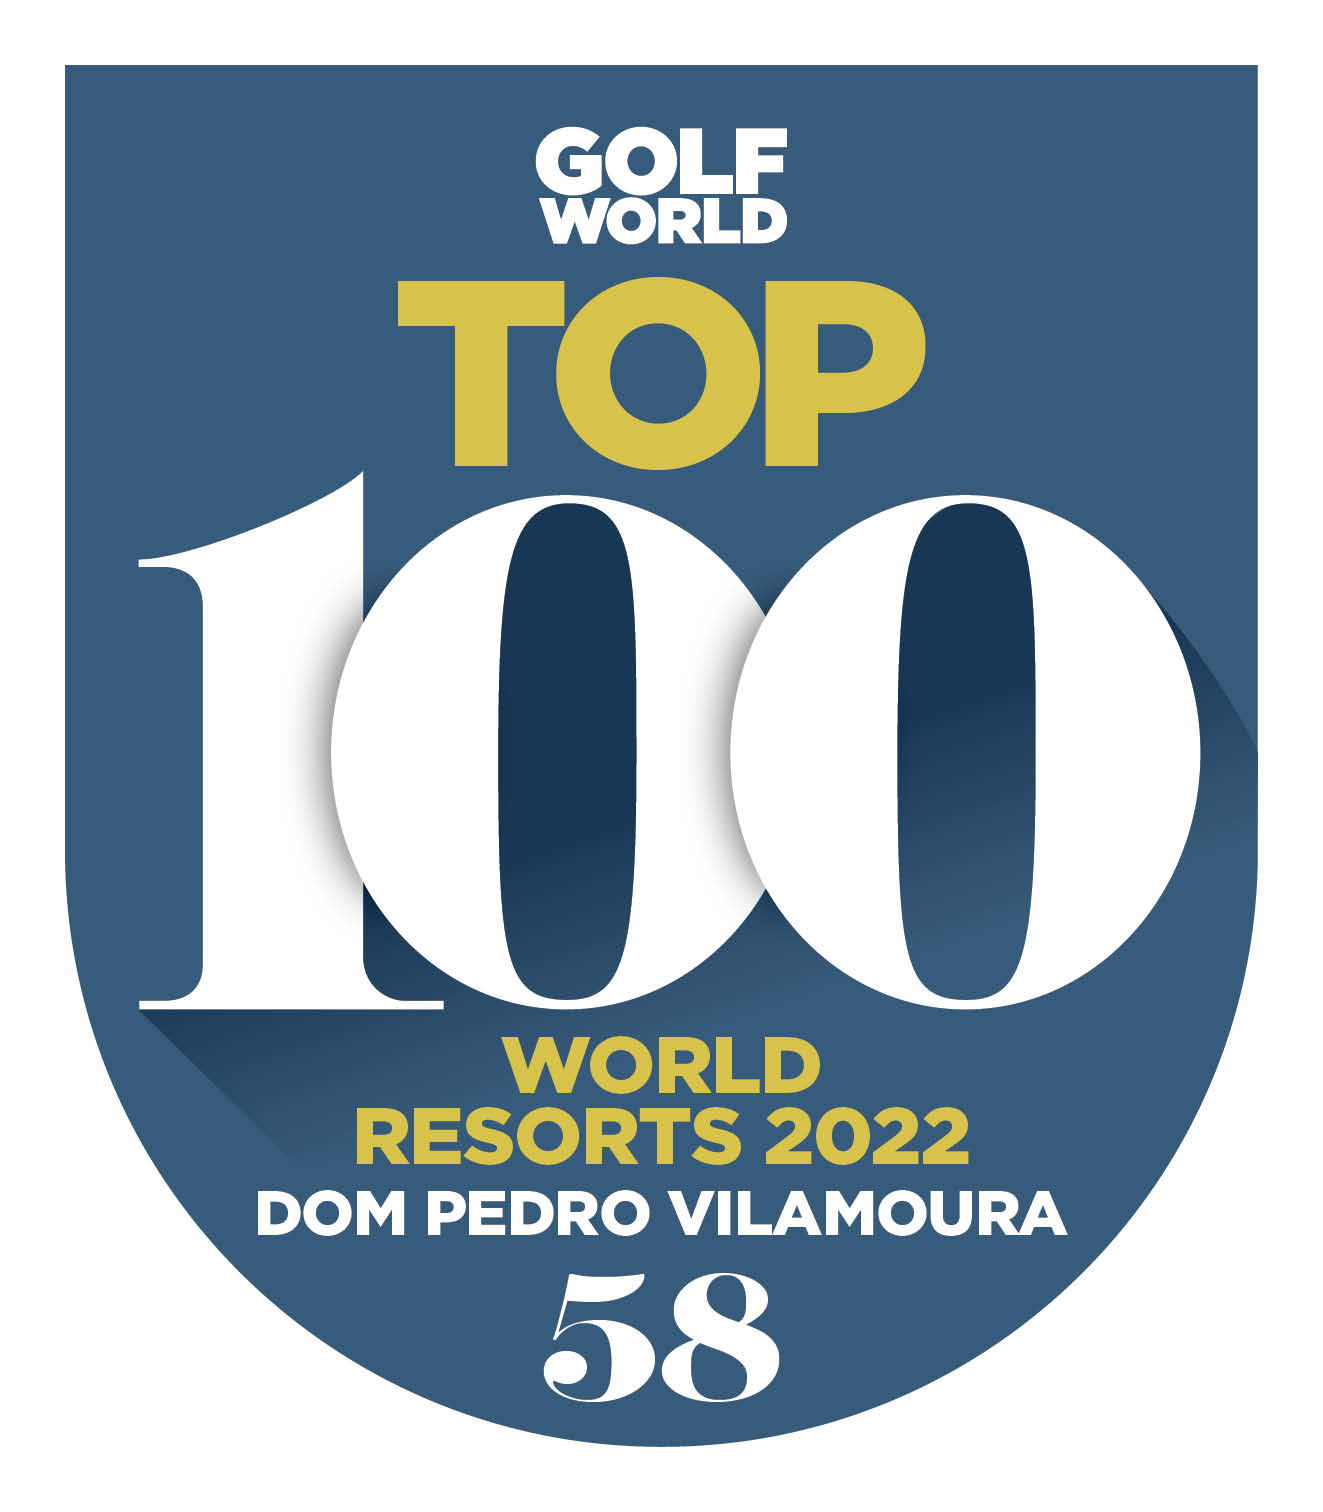 TOP 100 World Resorts 2022: 58th place 